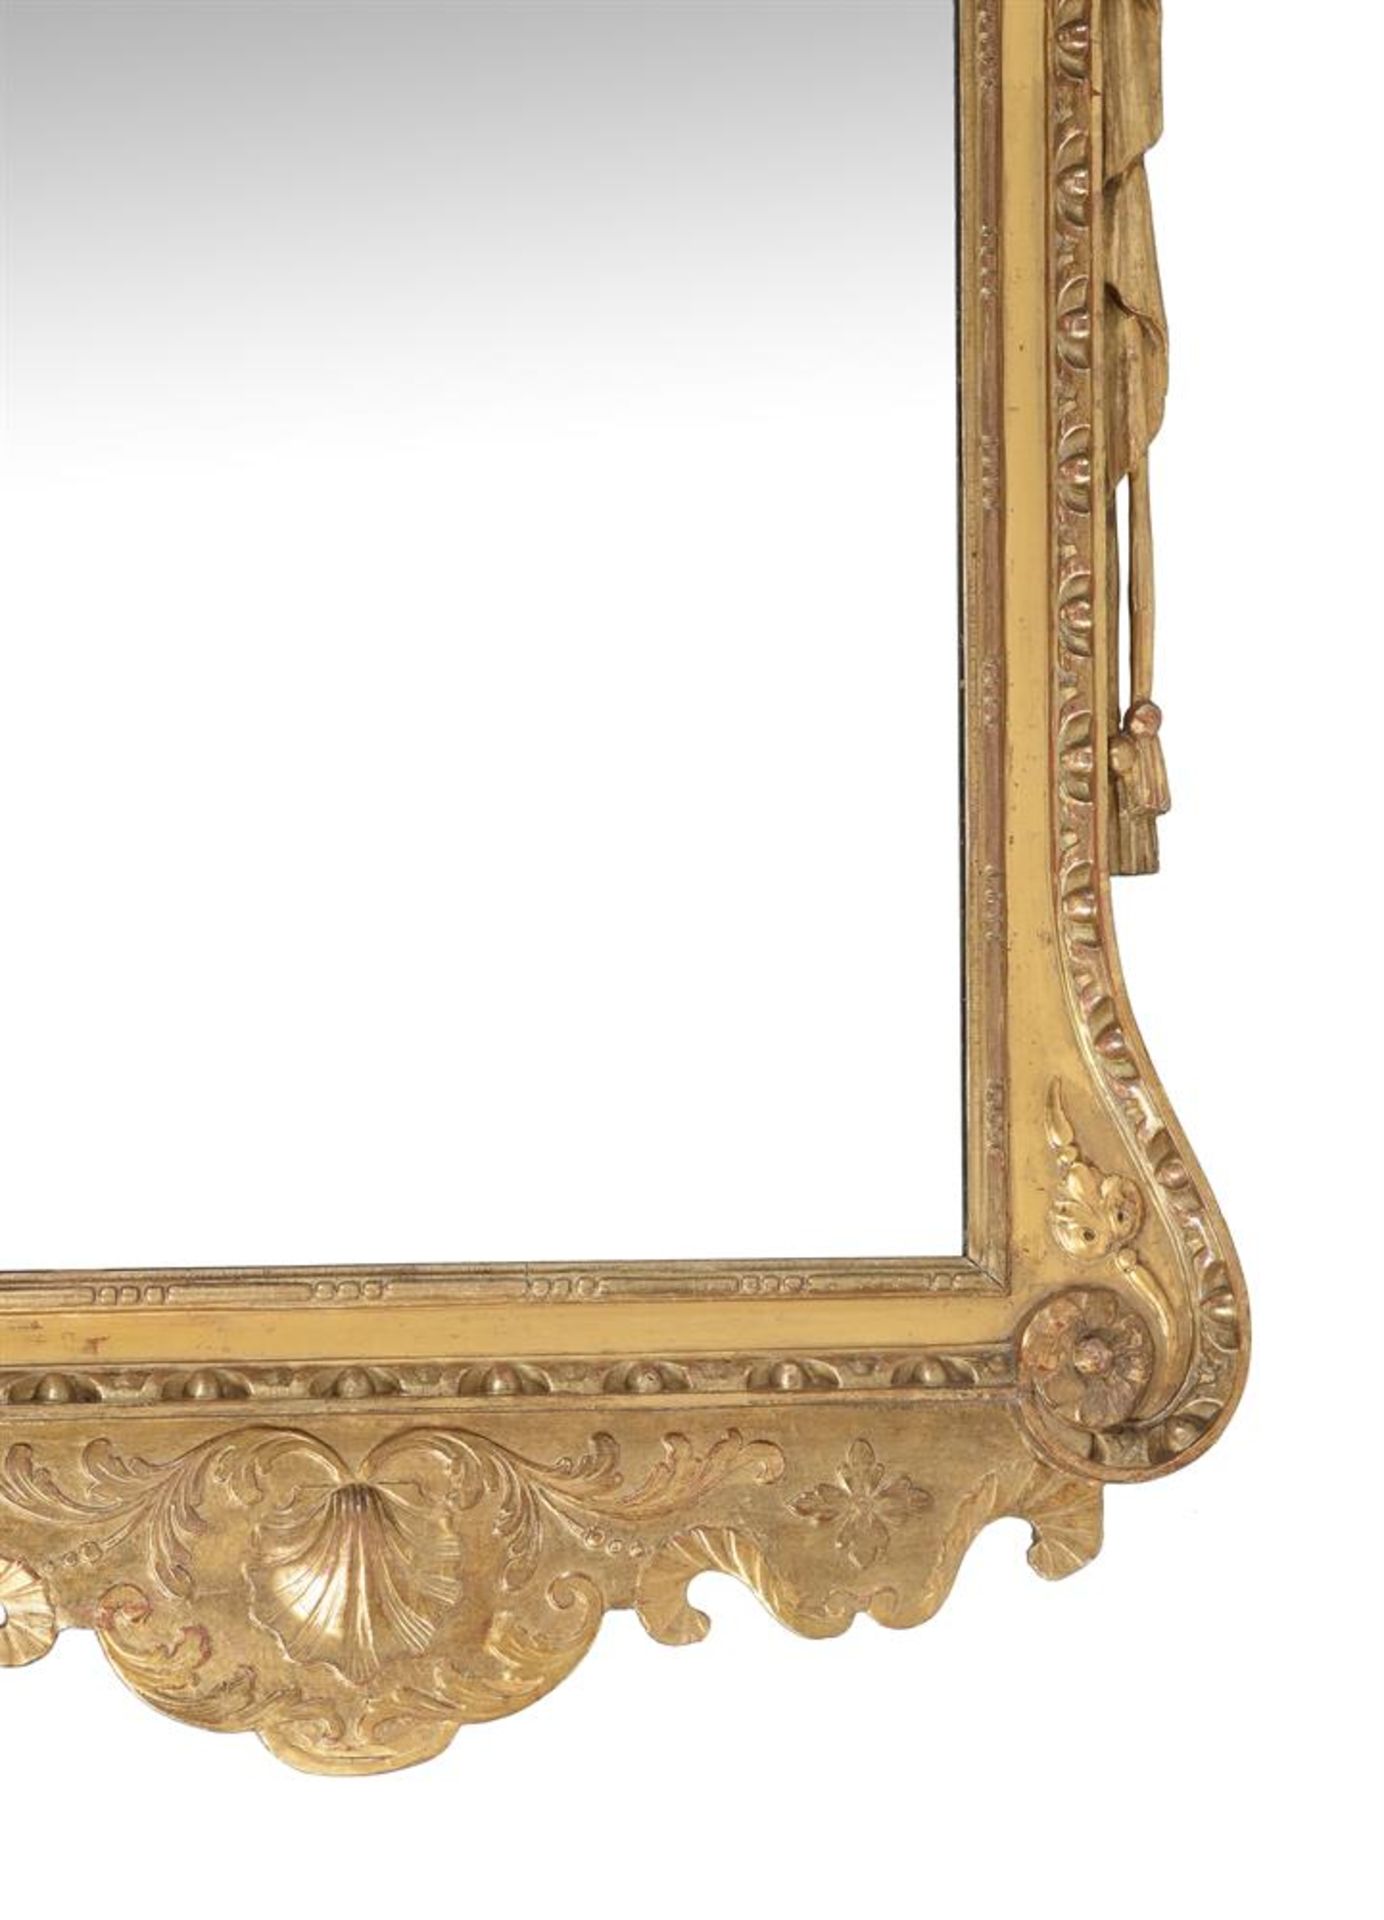 A GEORGE II CARVED GILTWOOD PIER MIRROR, CIRCA 1730 - Image 2 of 3